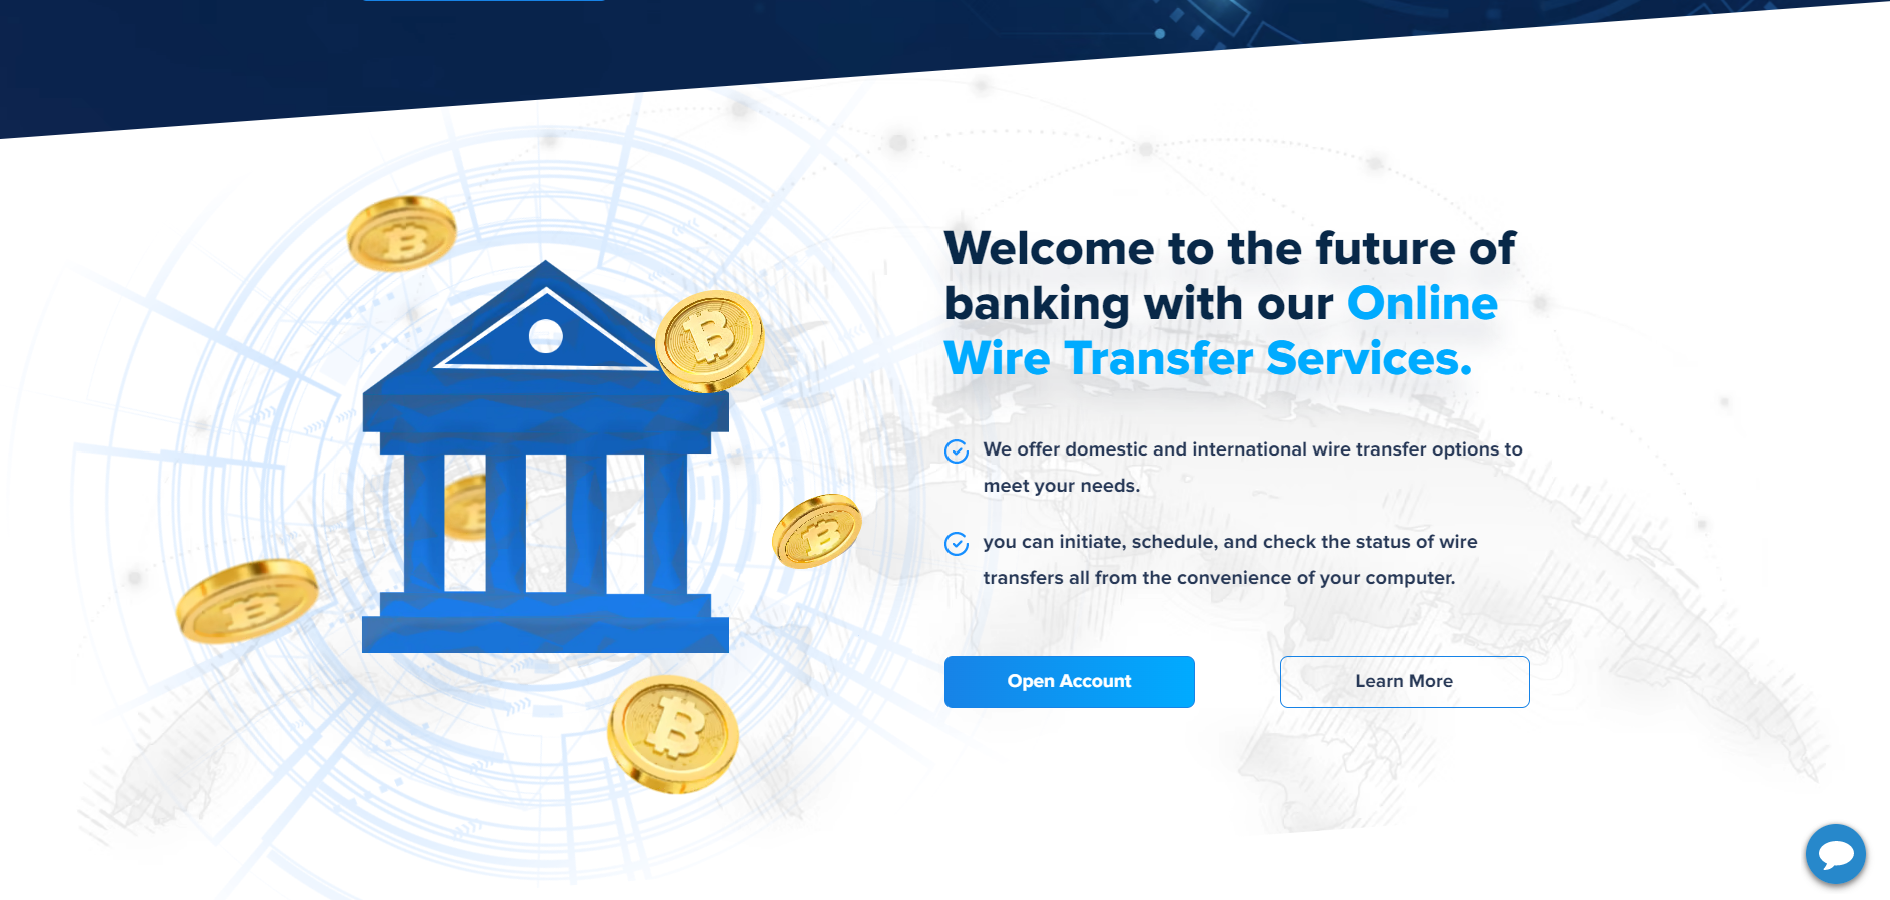 Welcome to the future of banking with our Online Wire Transfer Services